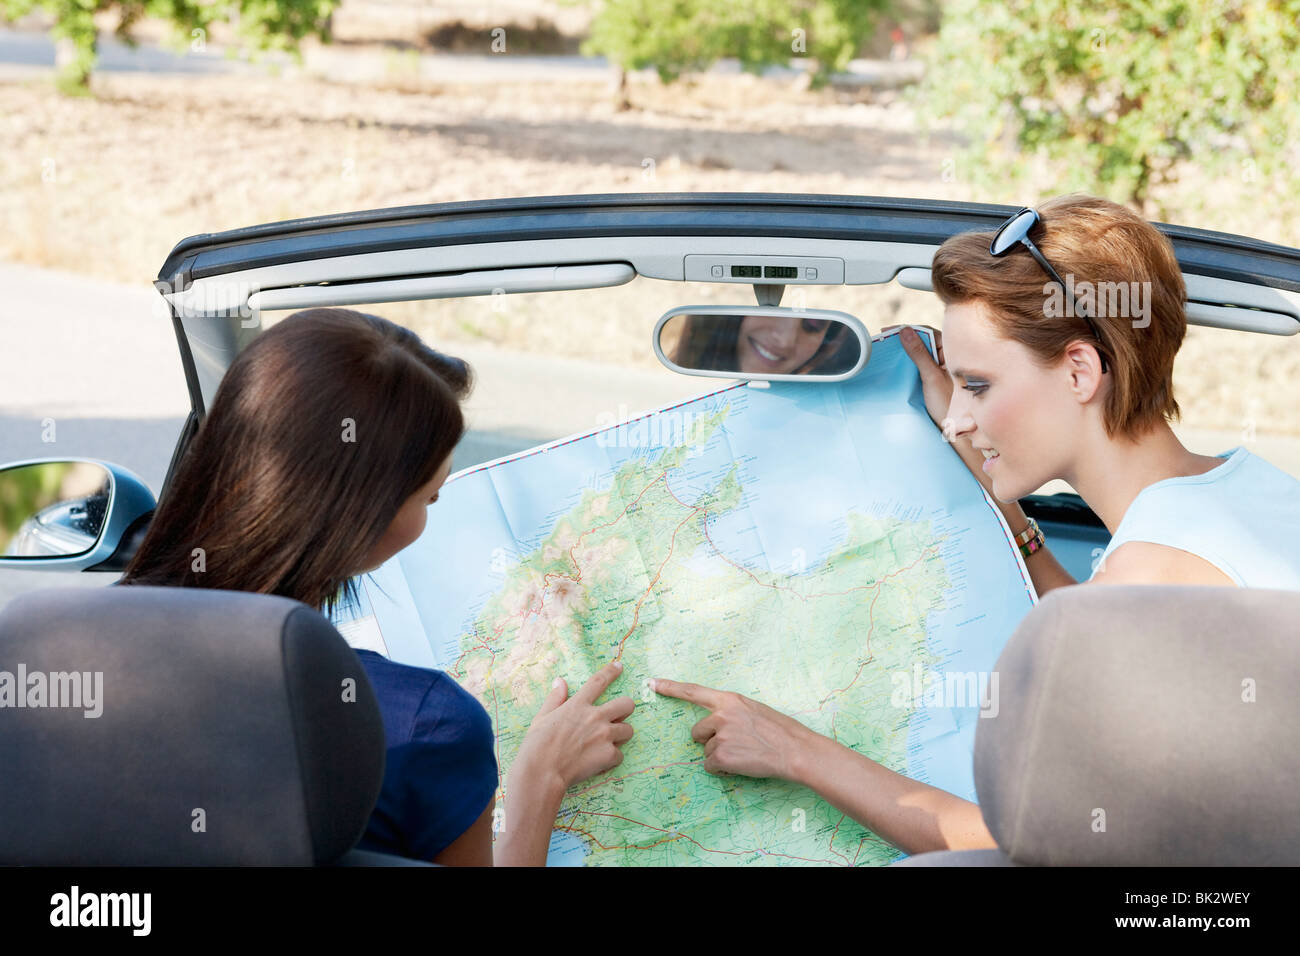 Two women reading a map in a car Stock Photo